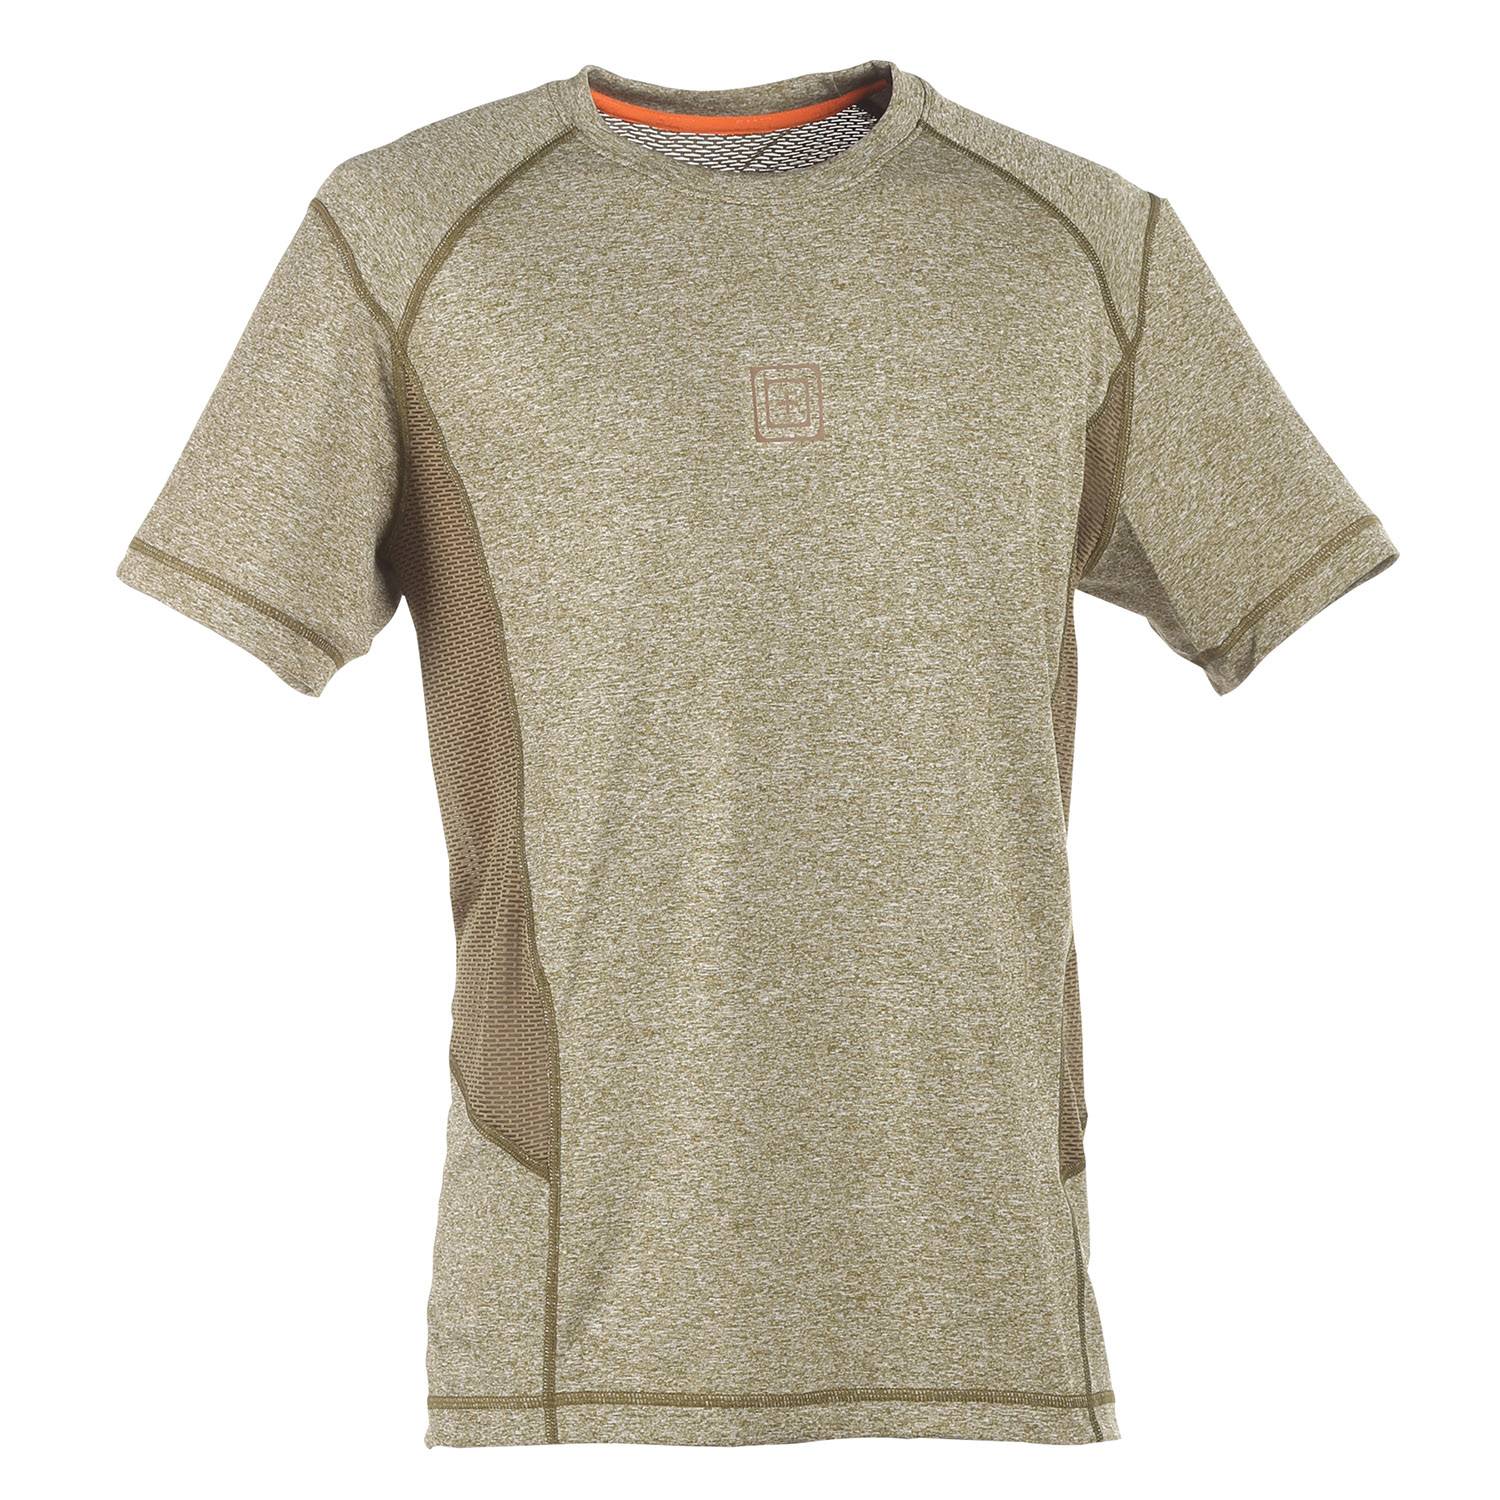 5.11 TACTICAL RECON PERFORMANCE T-SHIRT